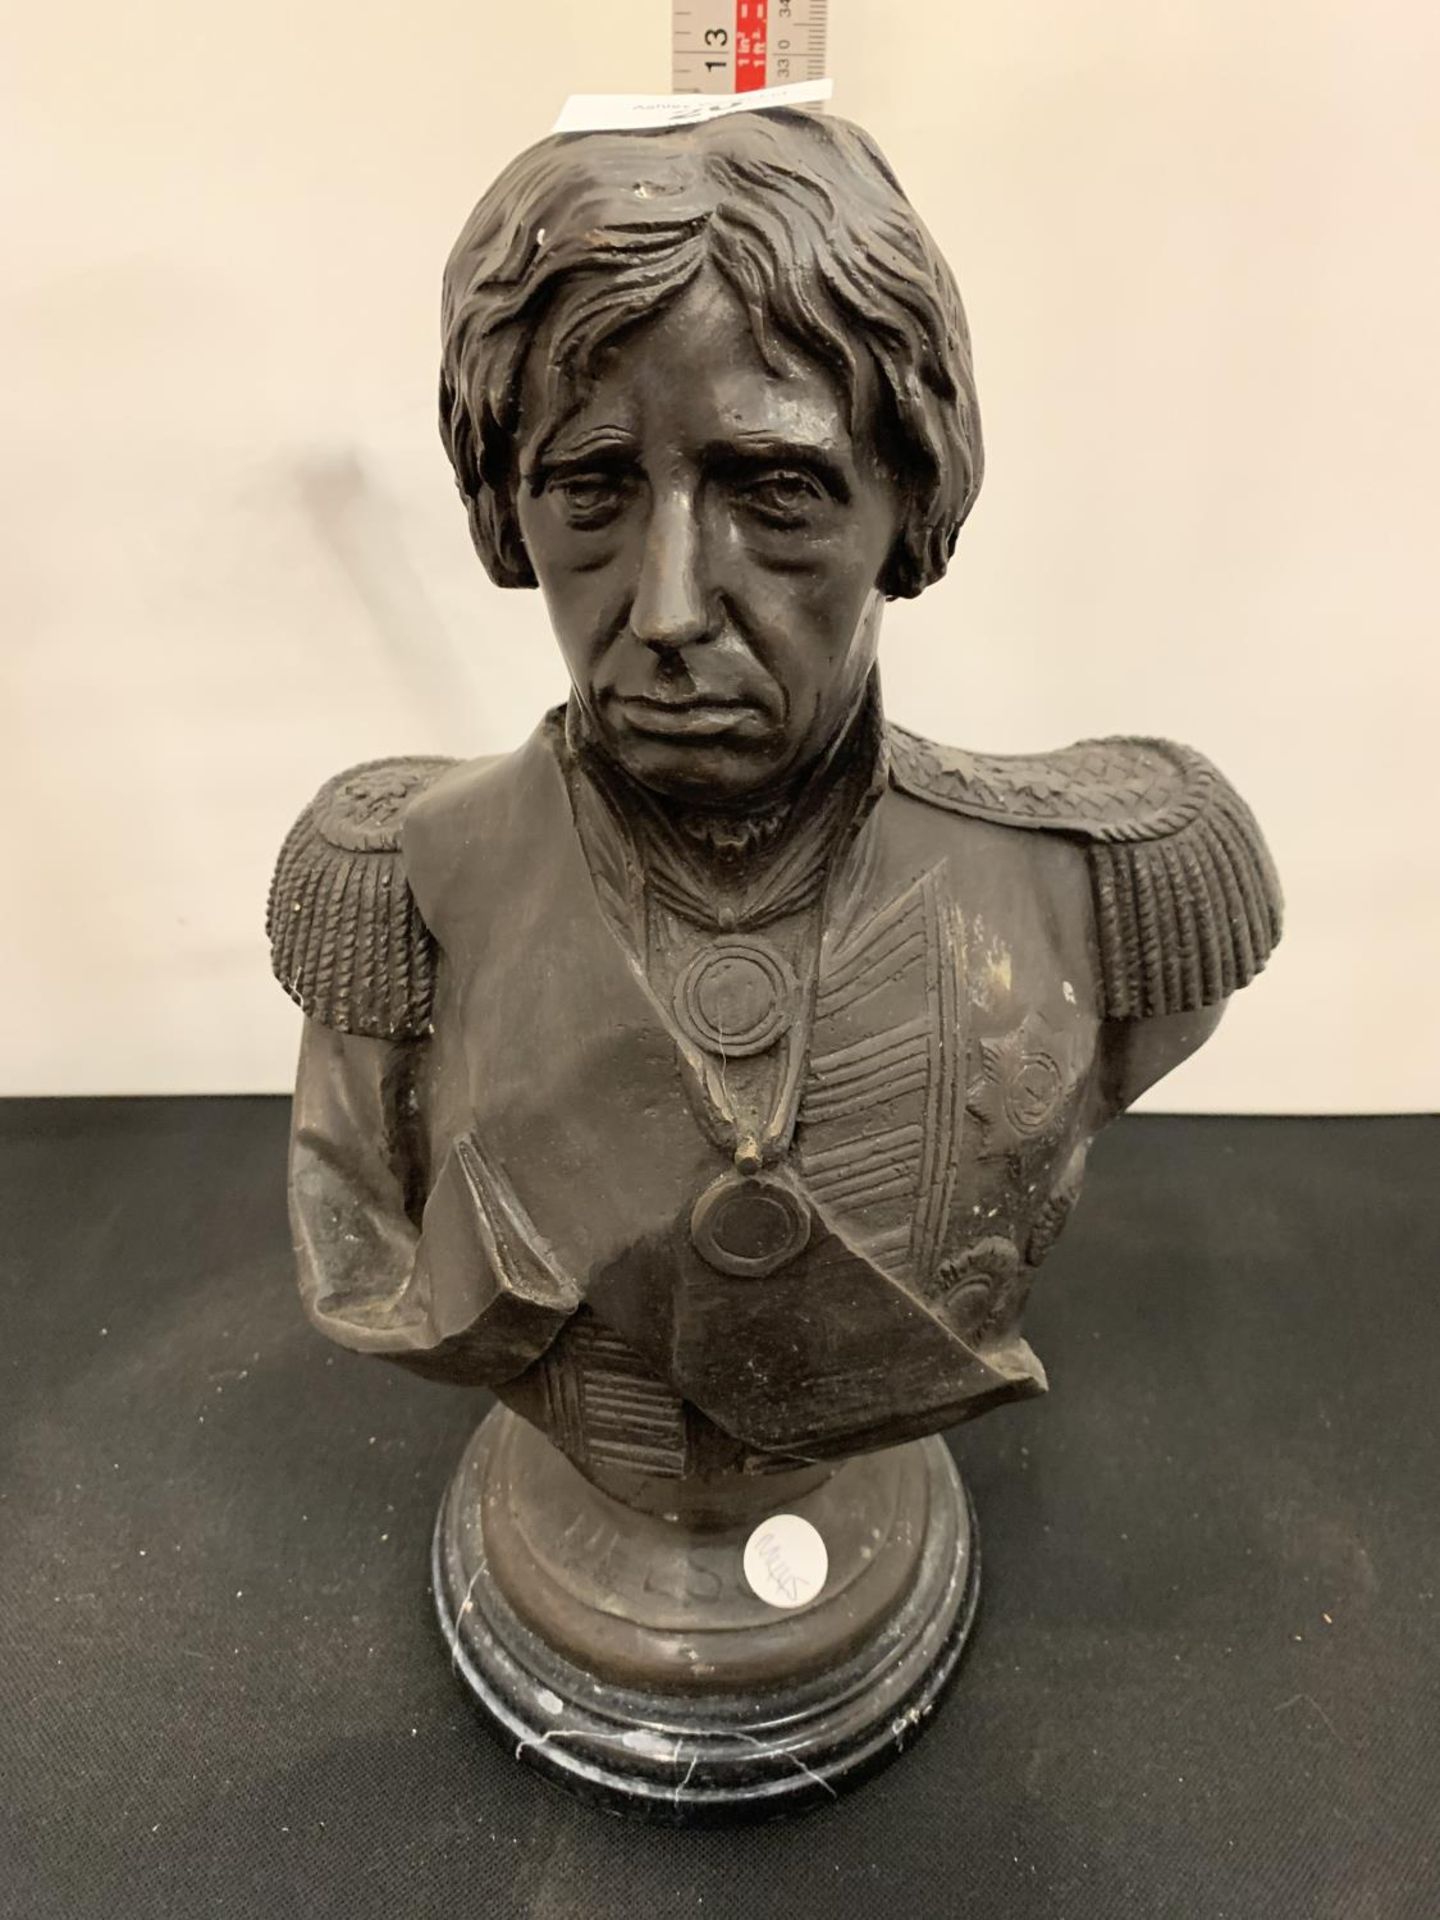 A BRONZE BUST OF NELSON ON A MARBLE BASE